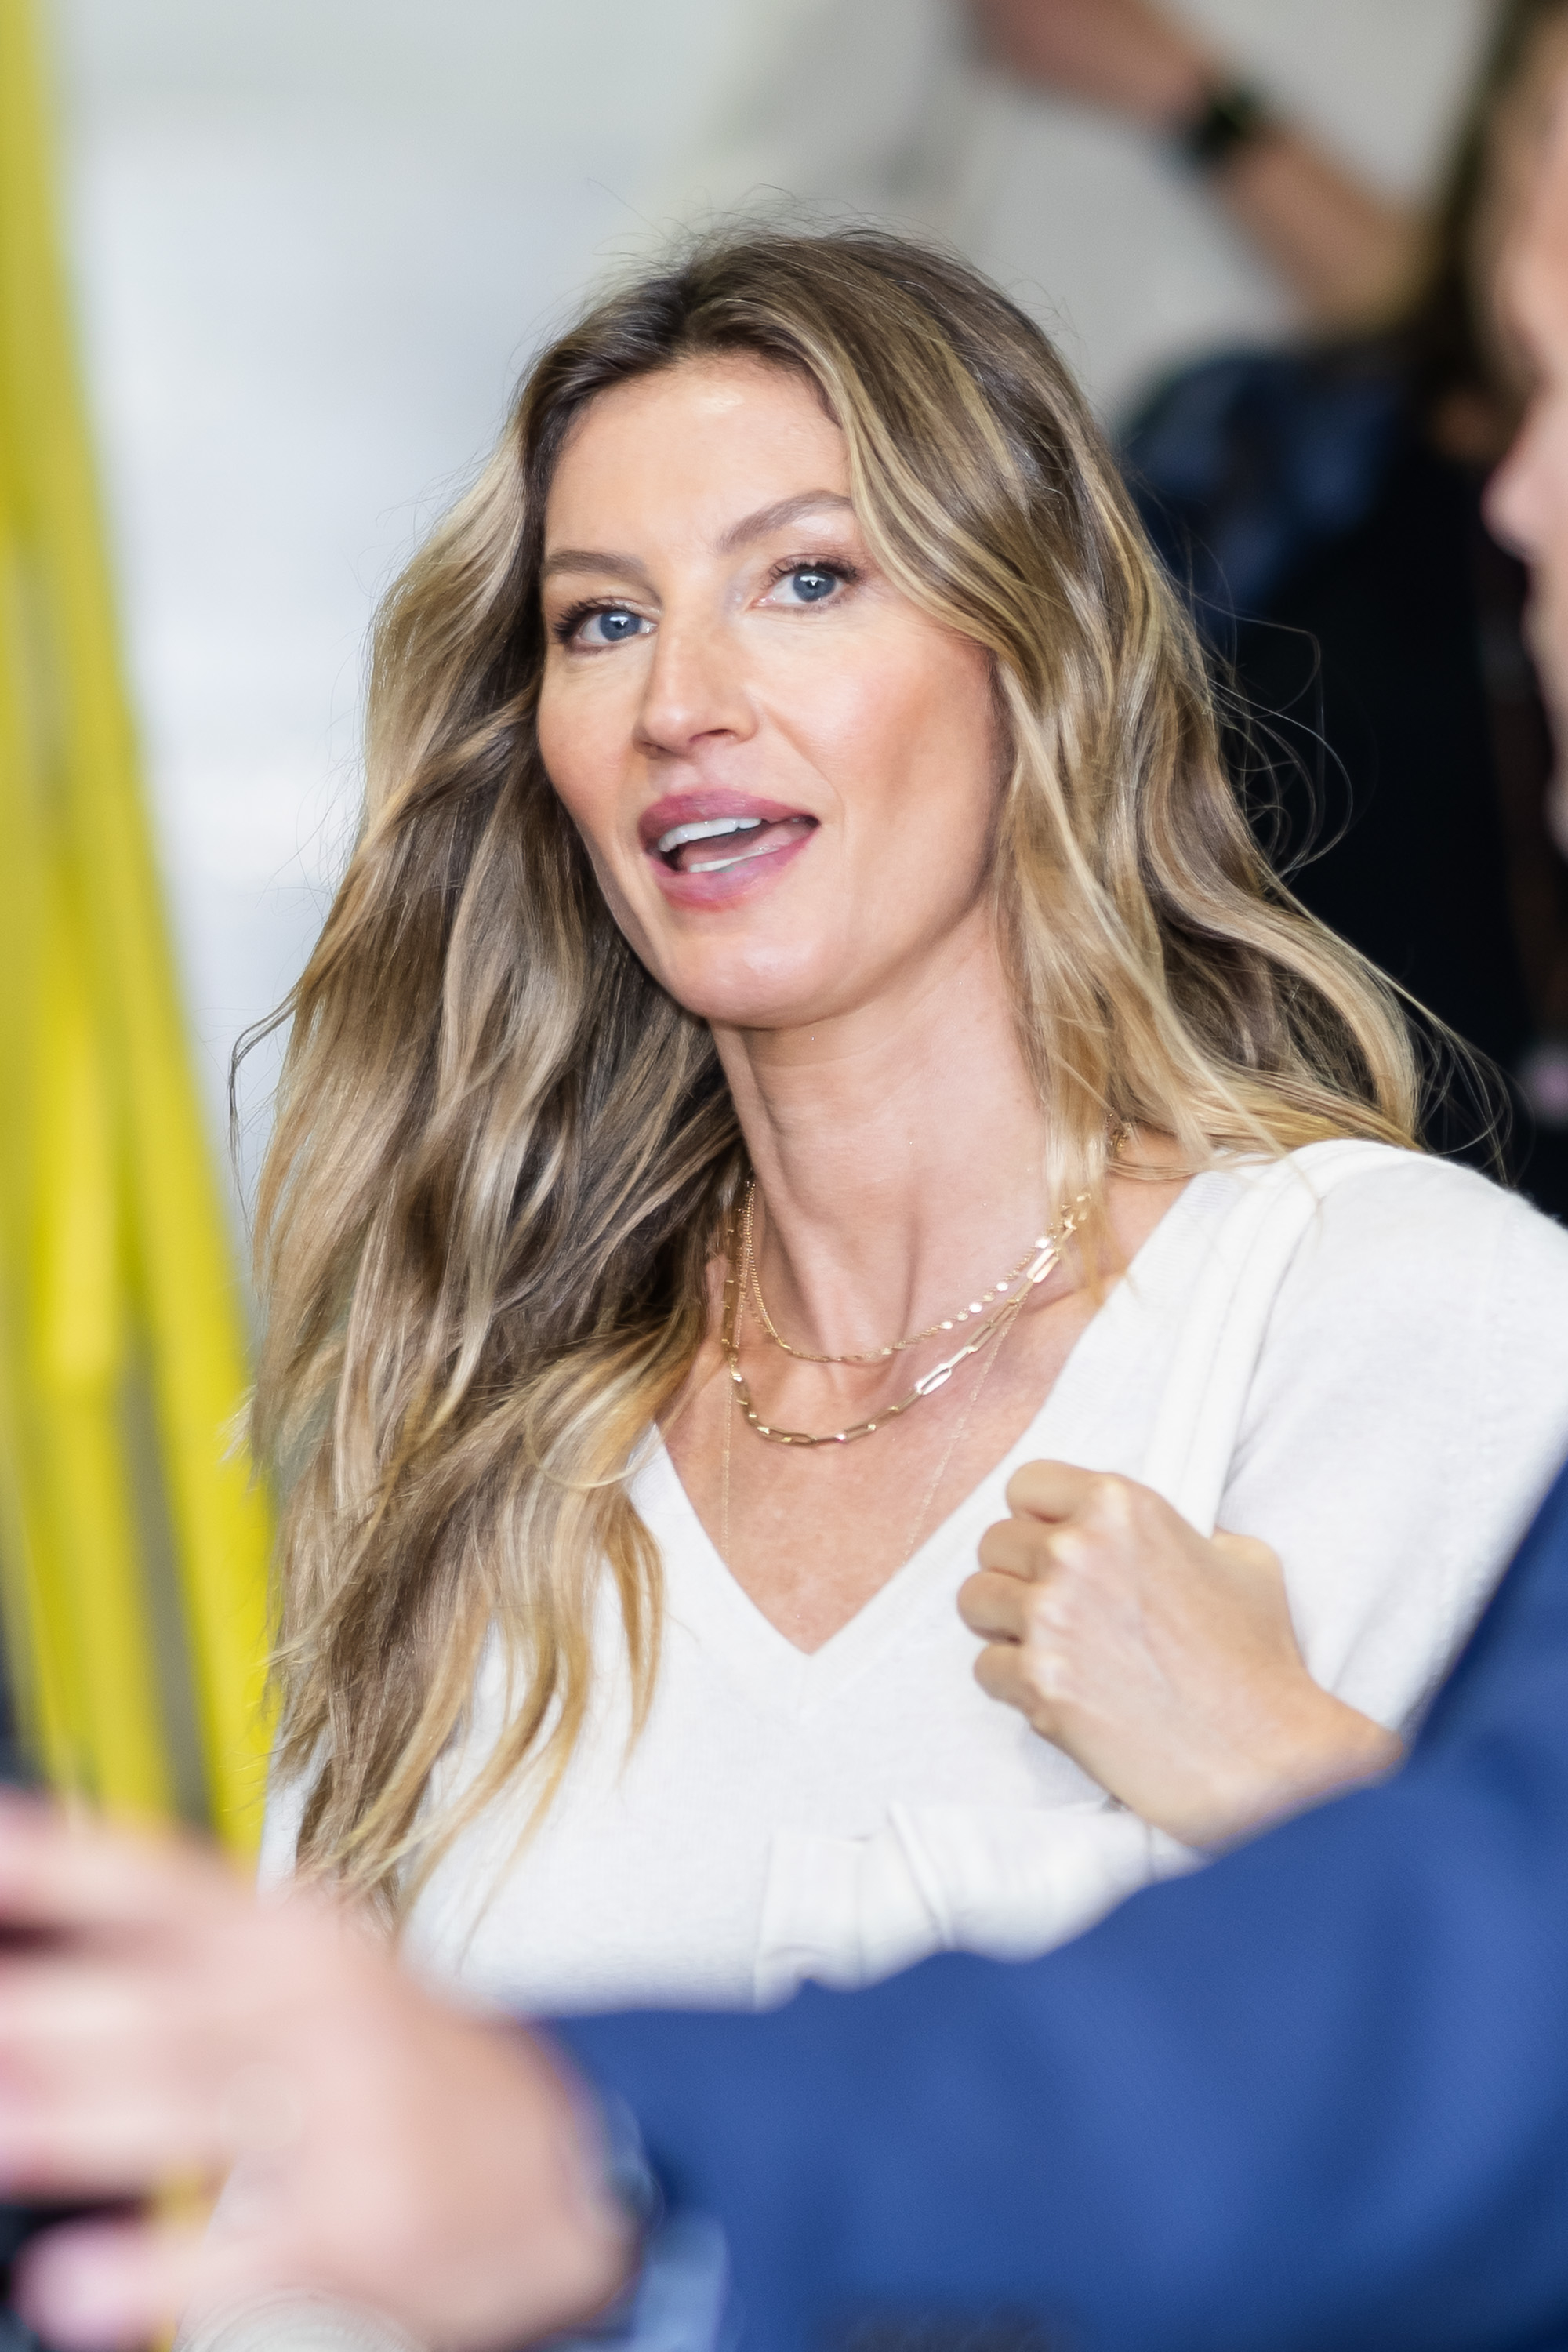 Gisele Bündchen in a white top with layered necklaces, interacting with someone off-camera